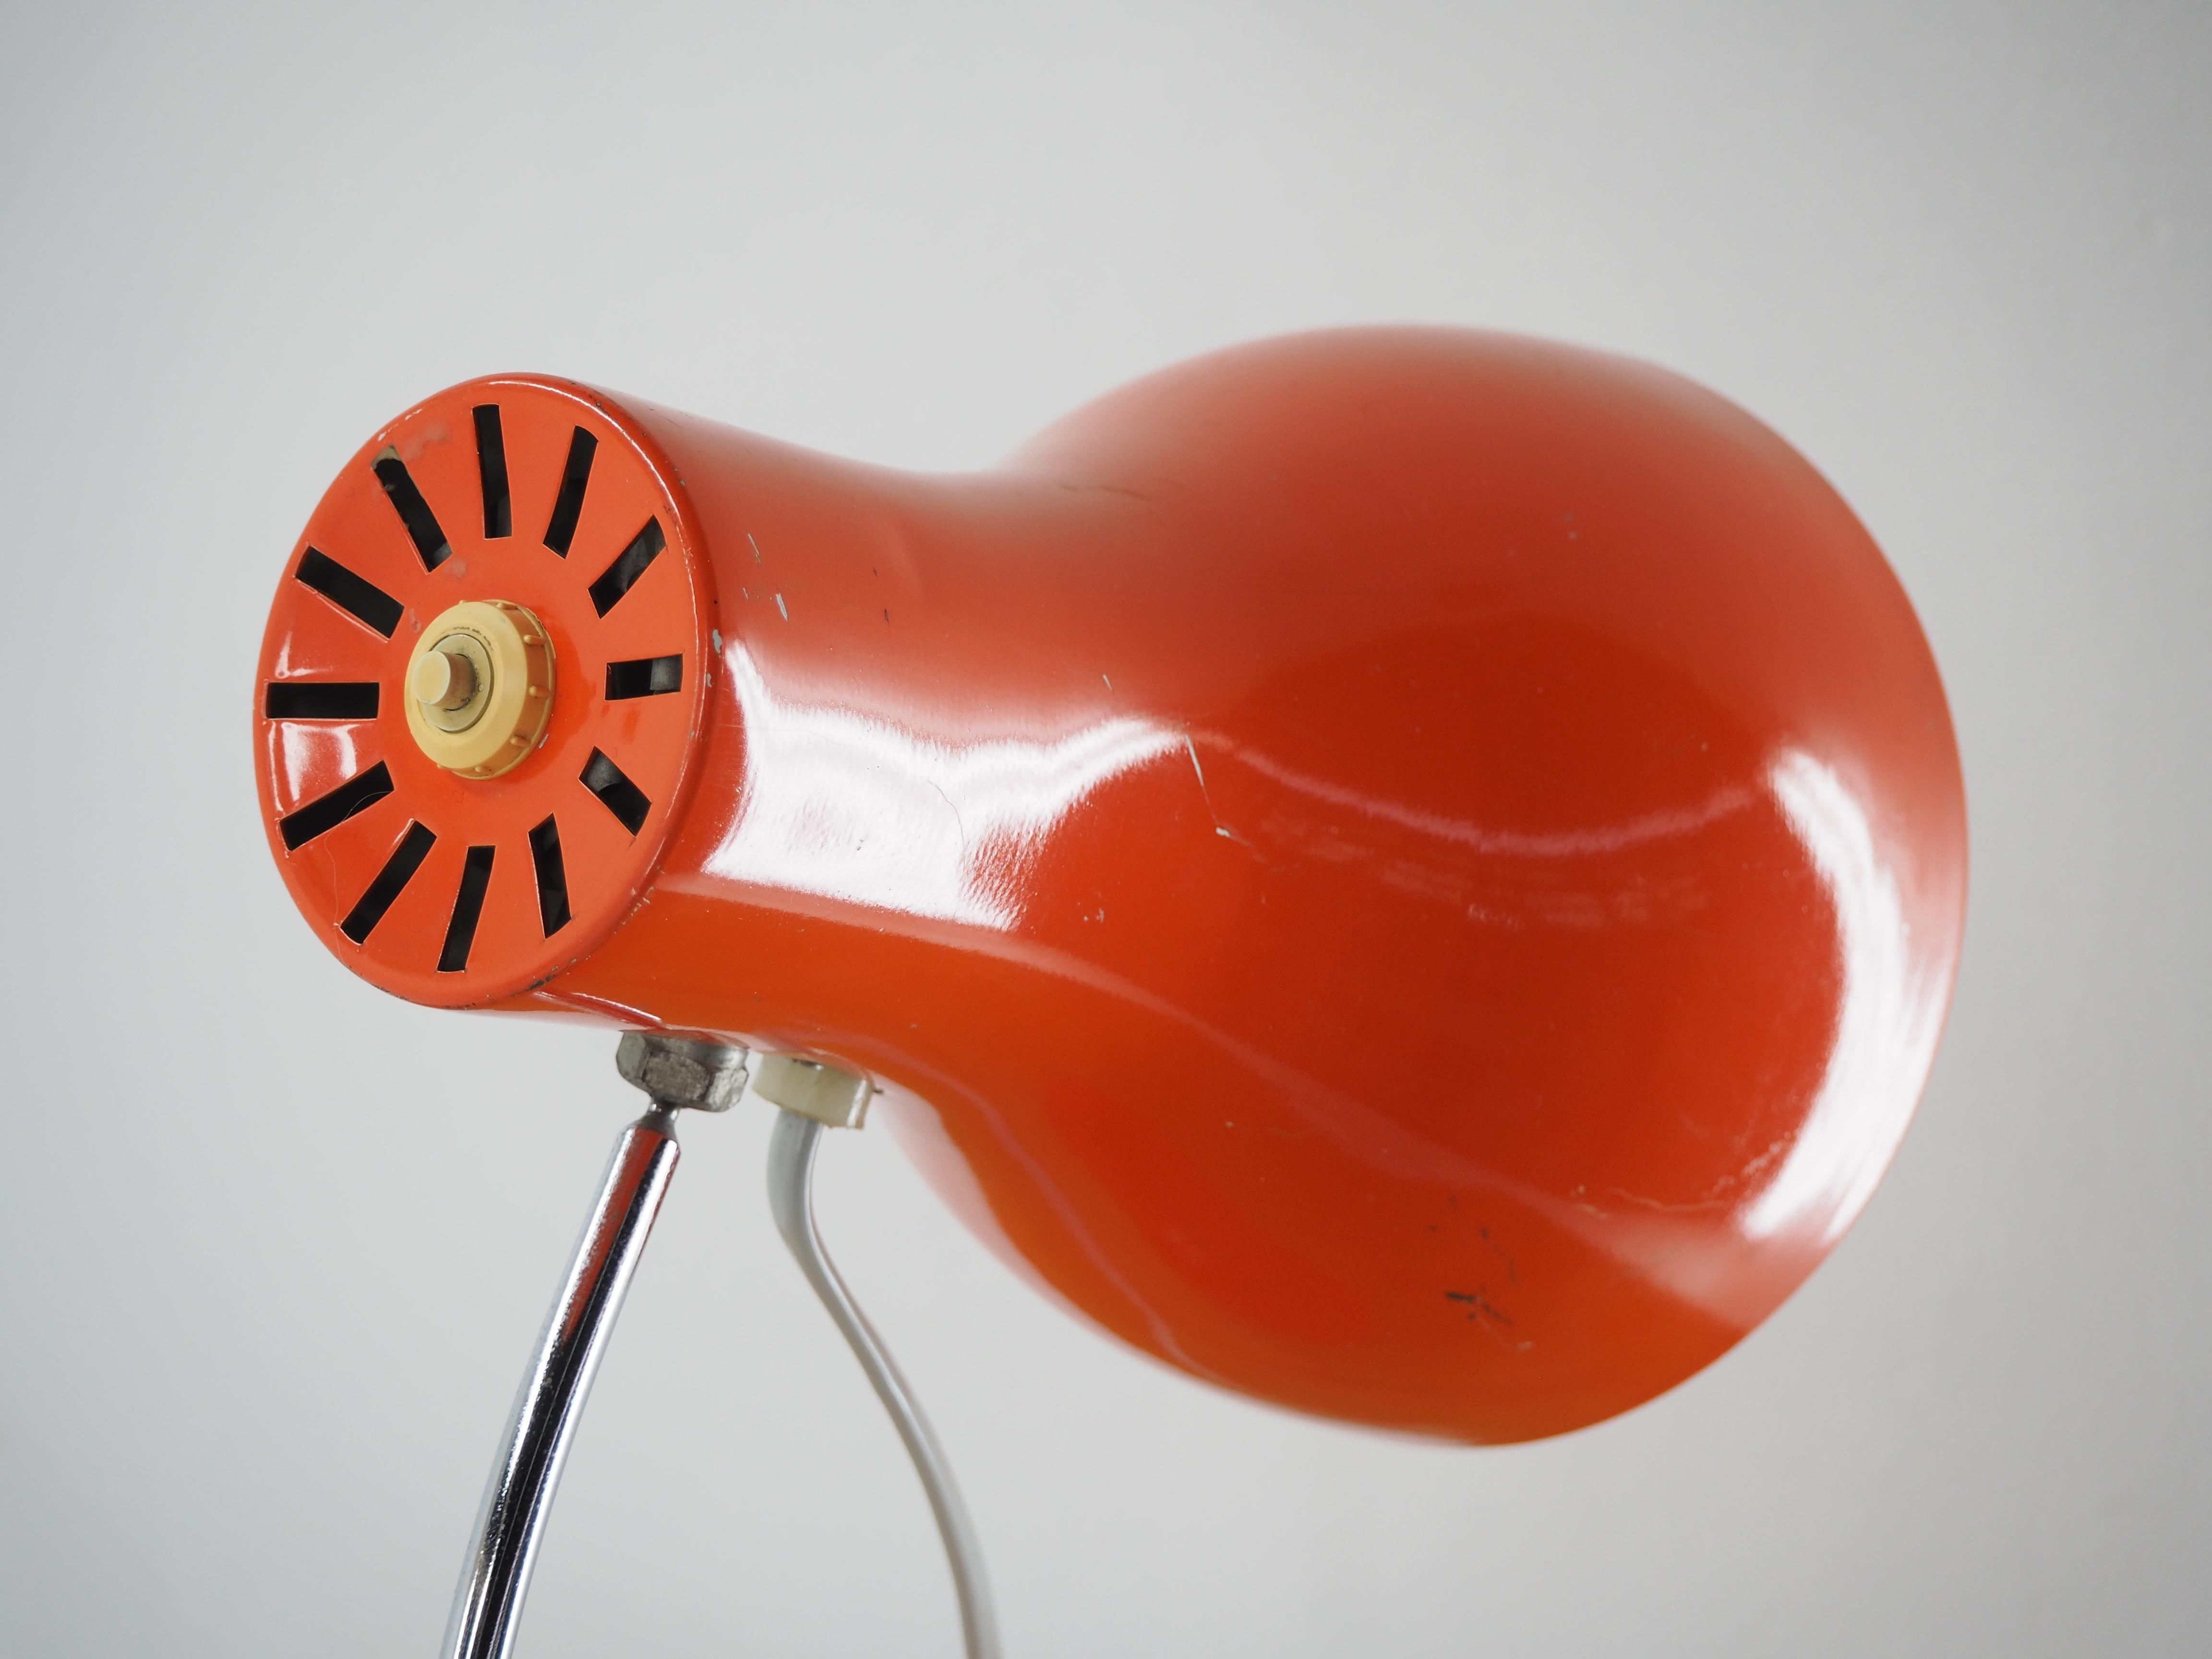 Midcentury Table Lamp Designed by J. Hurka for Napako 1970s type 0521 1